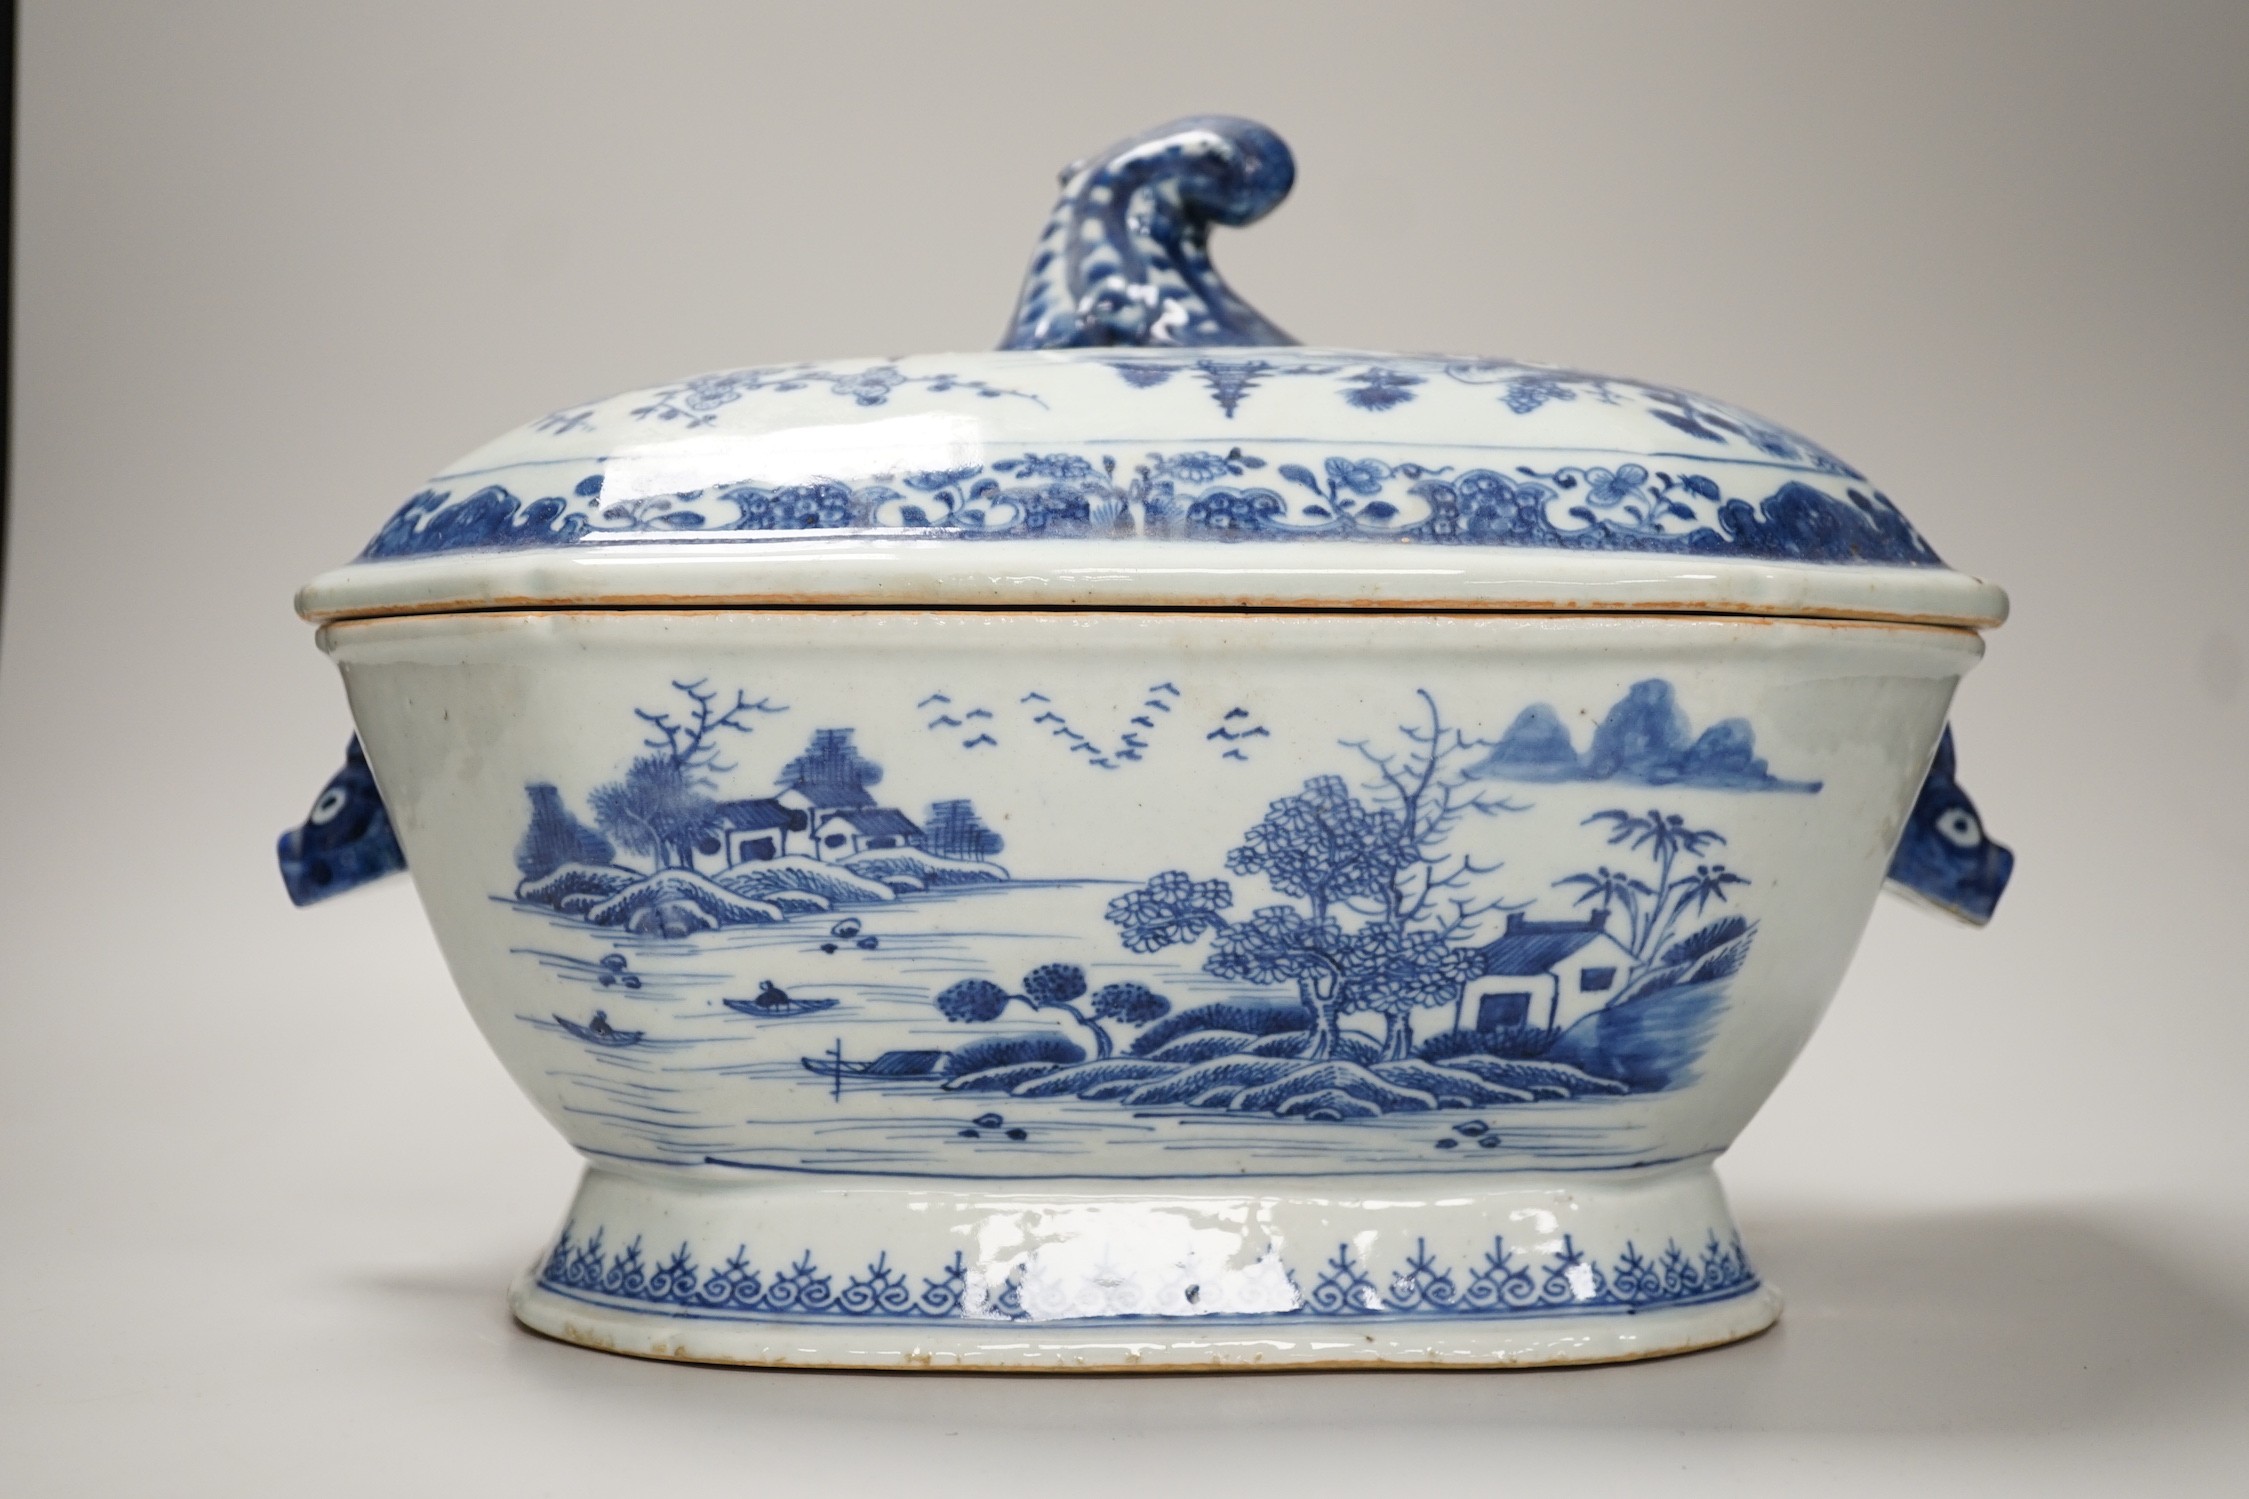 An 18th century Chinese export blue and white porcelain tureen and cover, 24cm high, 30cm wide.